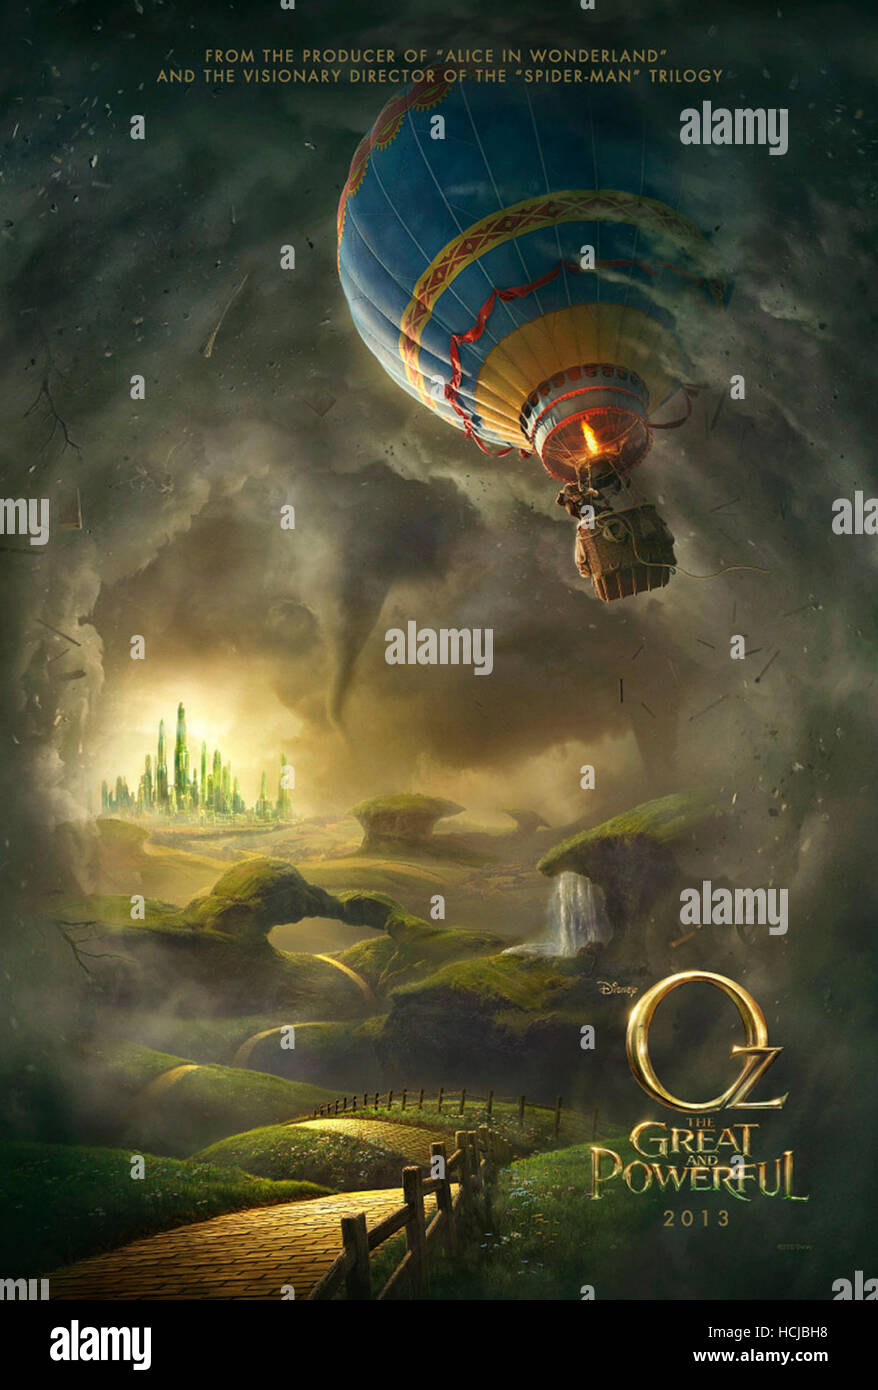 OZ THE GREAT AND POWERFUL, advance poster art, 2013. ©Walt Disney Pictures/Courtesy Everett Collection Stock Photo